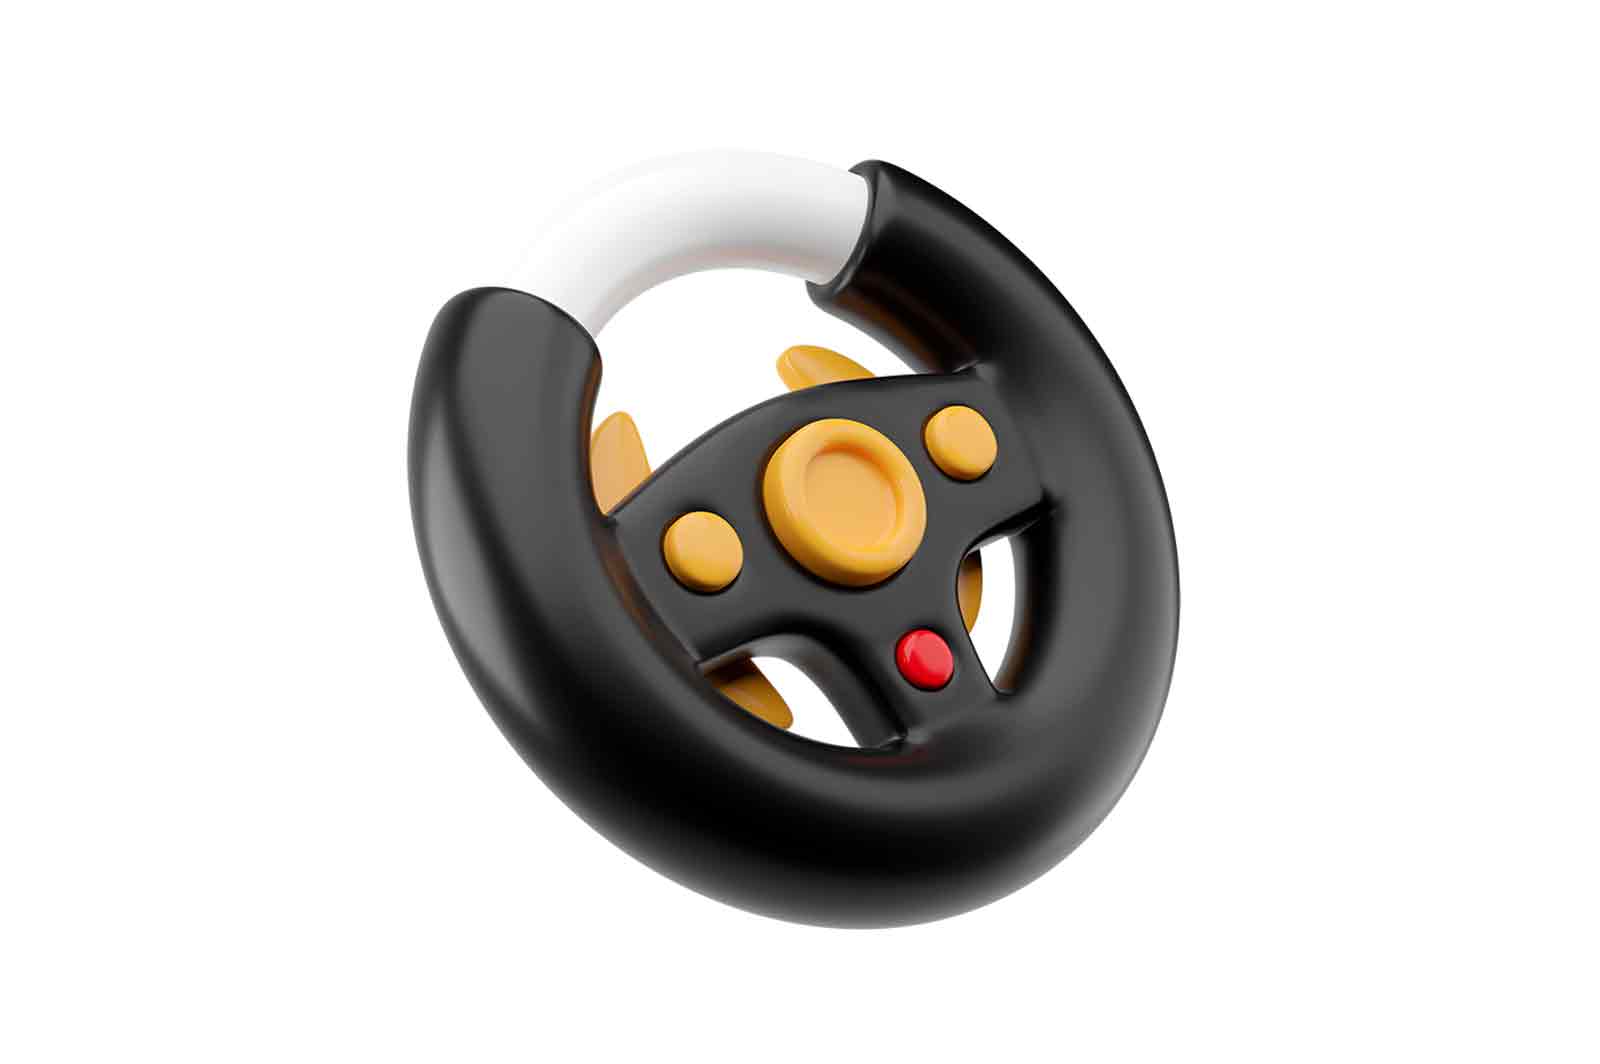 steering wheel controller, 3d rendered illustration, with yellow and red buttons and black and white body. Isolated on white background, realistic look.